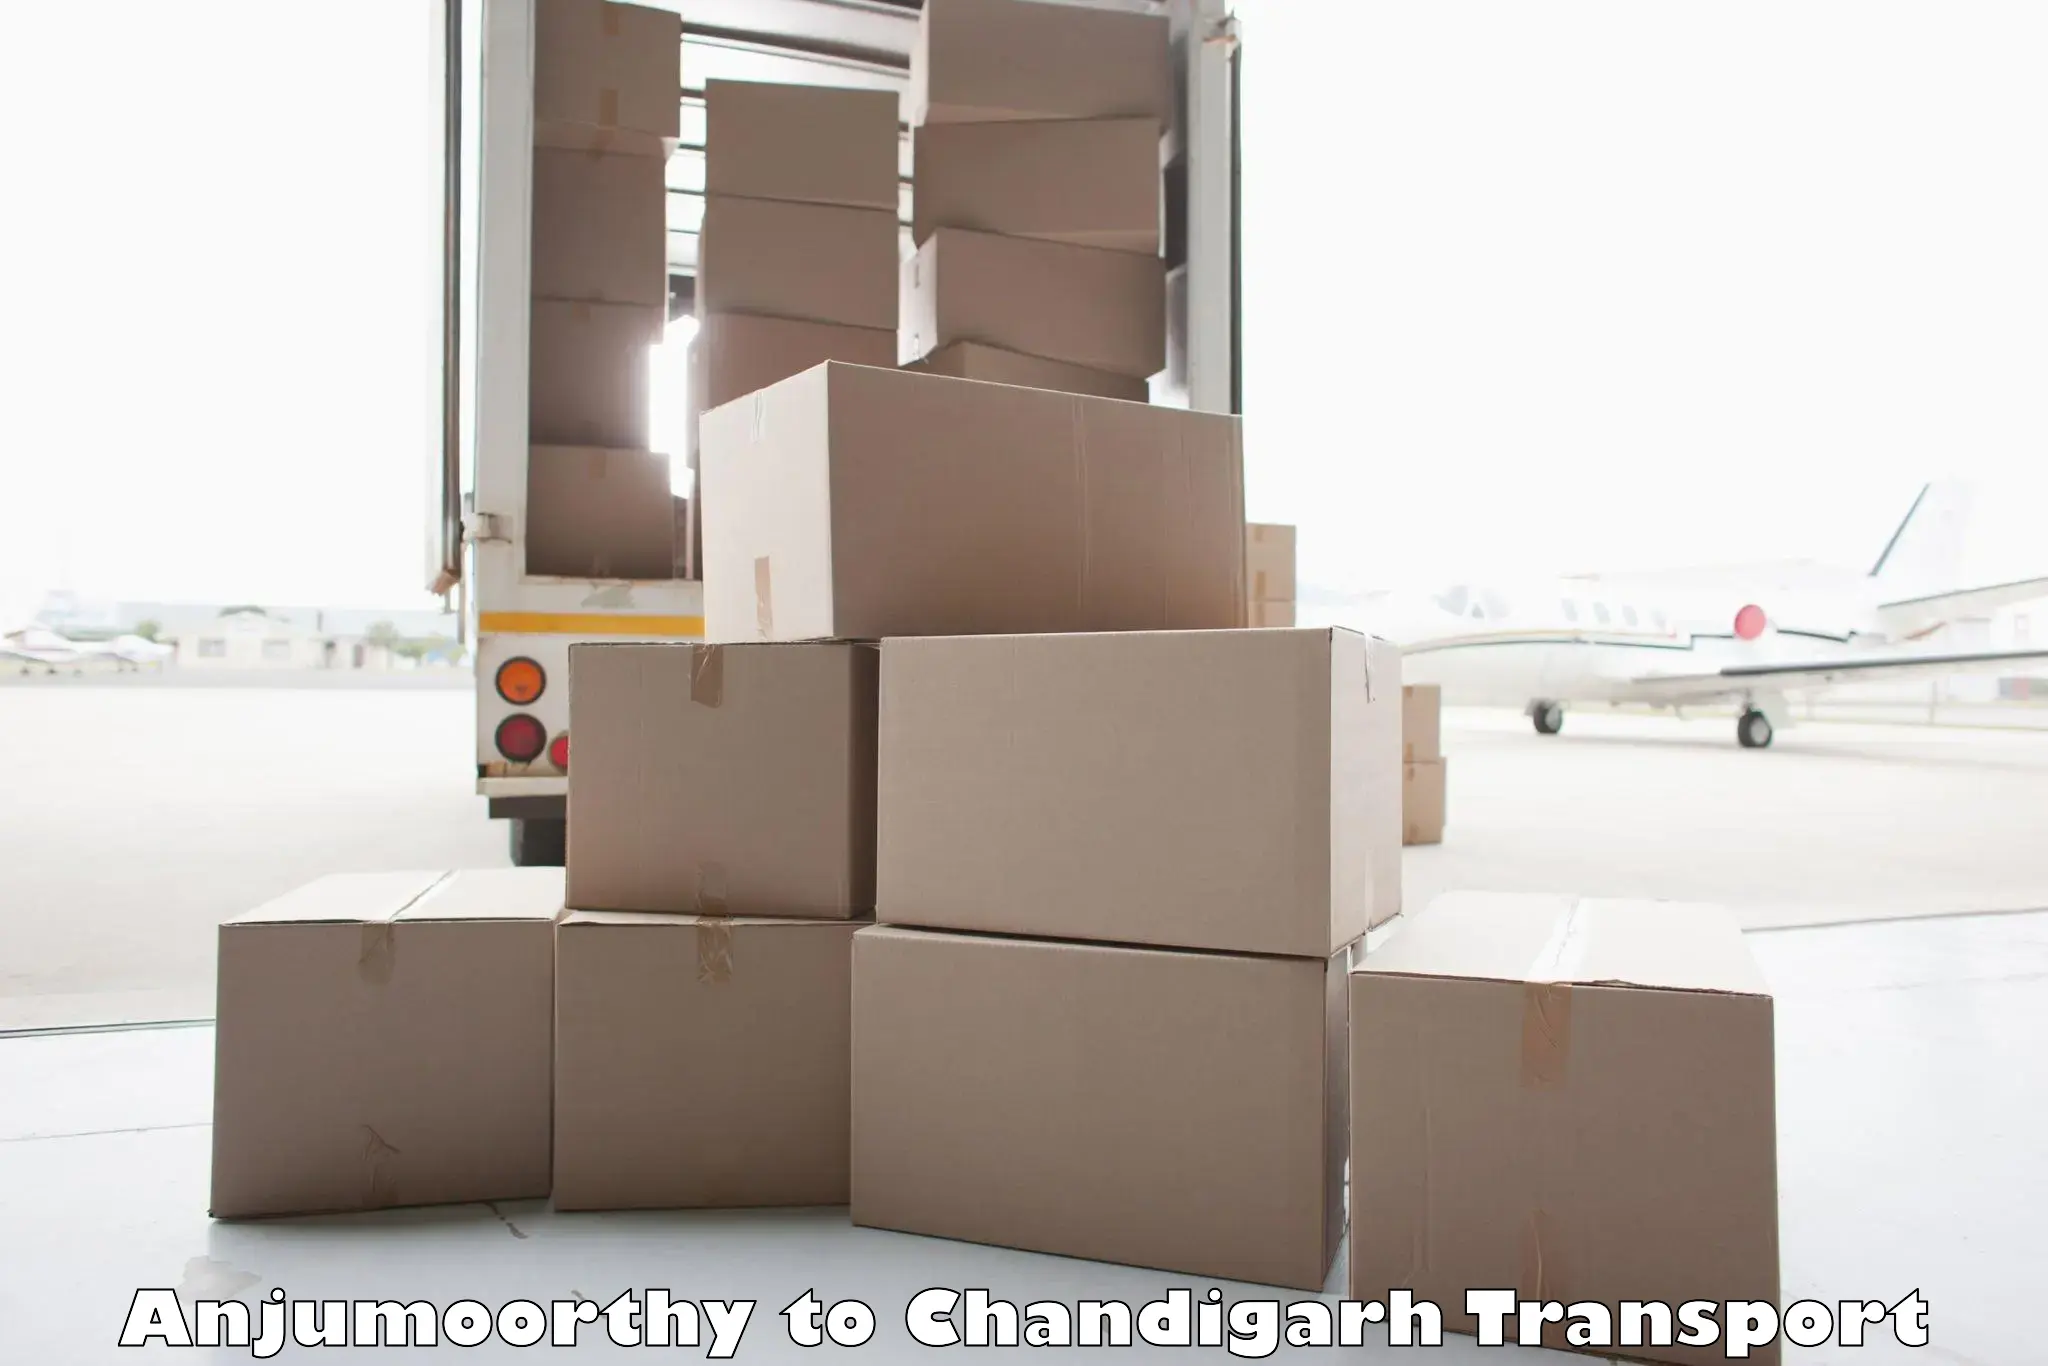 Parcel transport services Anjumoorthy to Chandigarh